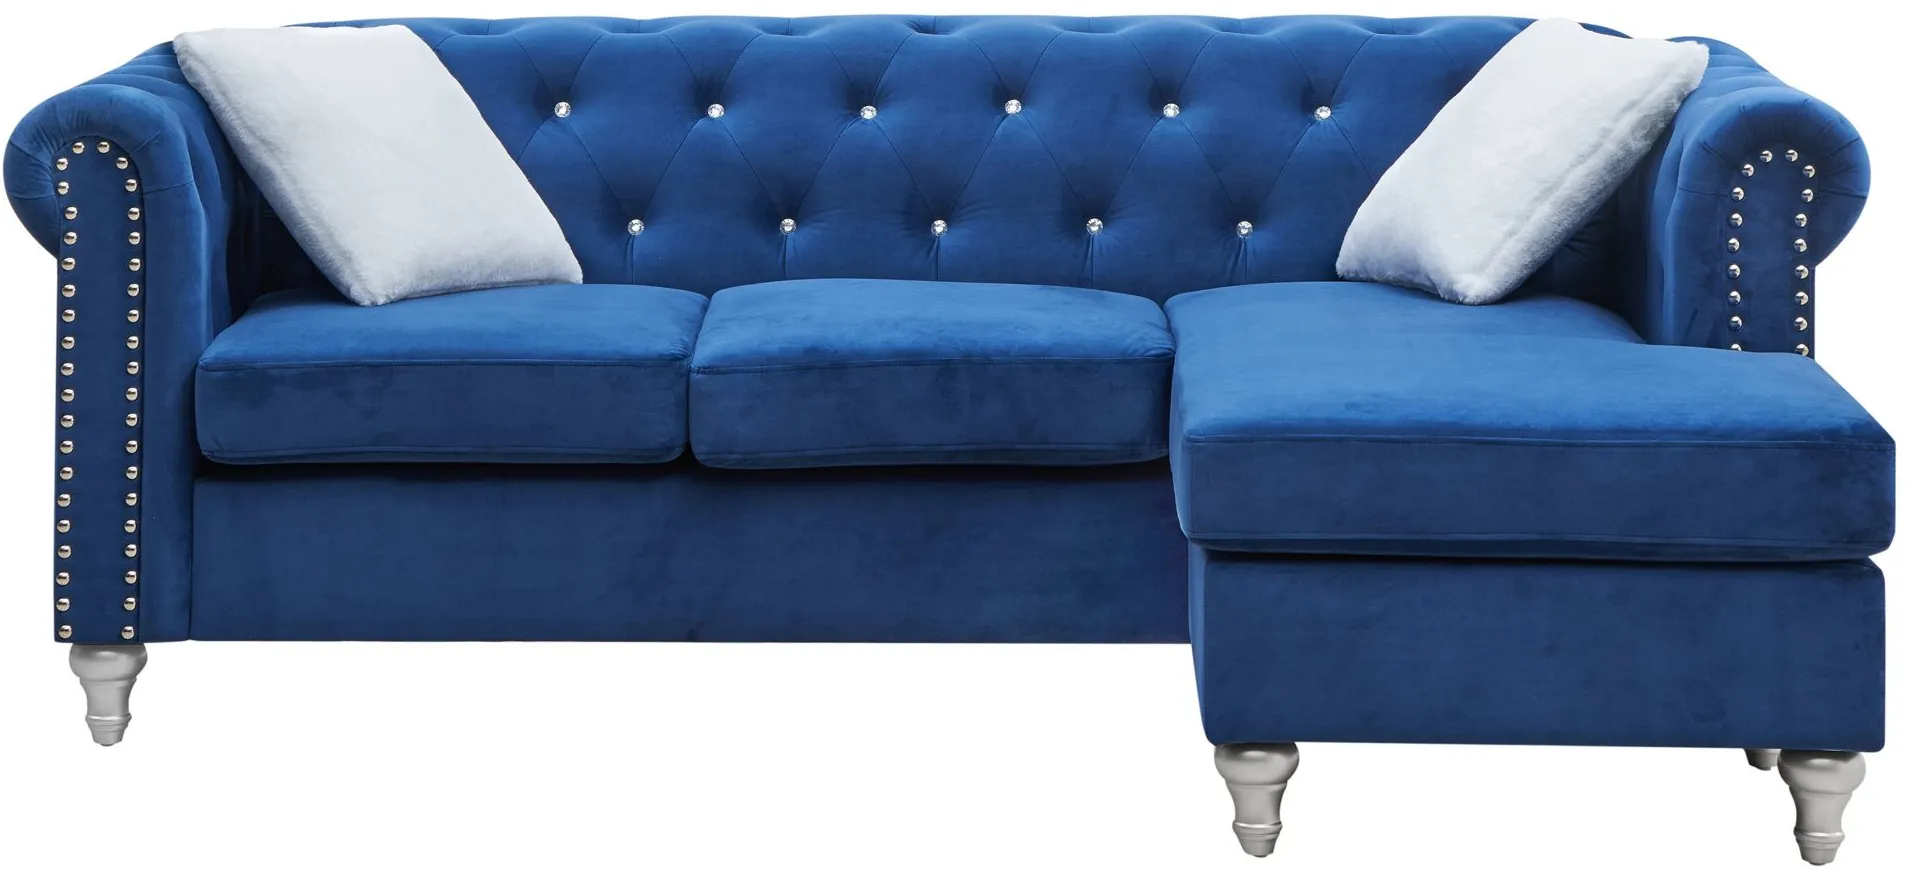 Raisa Sectional in Navy Blue by Glory Furniture